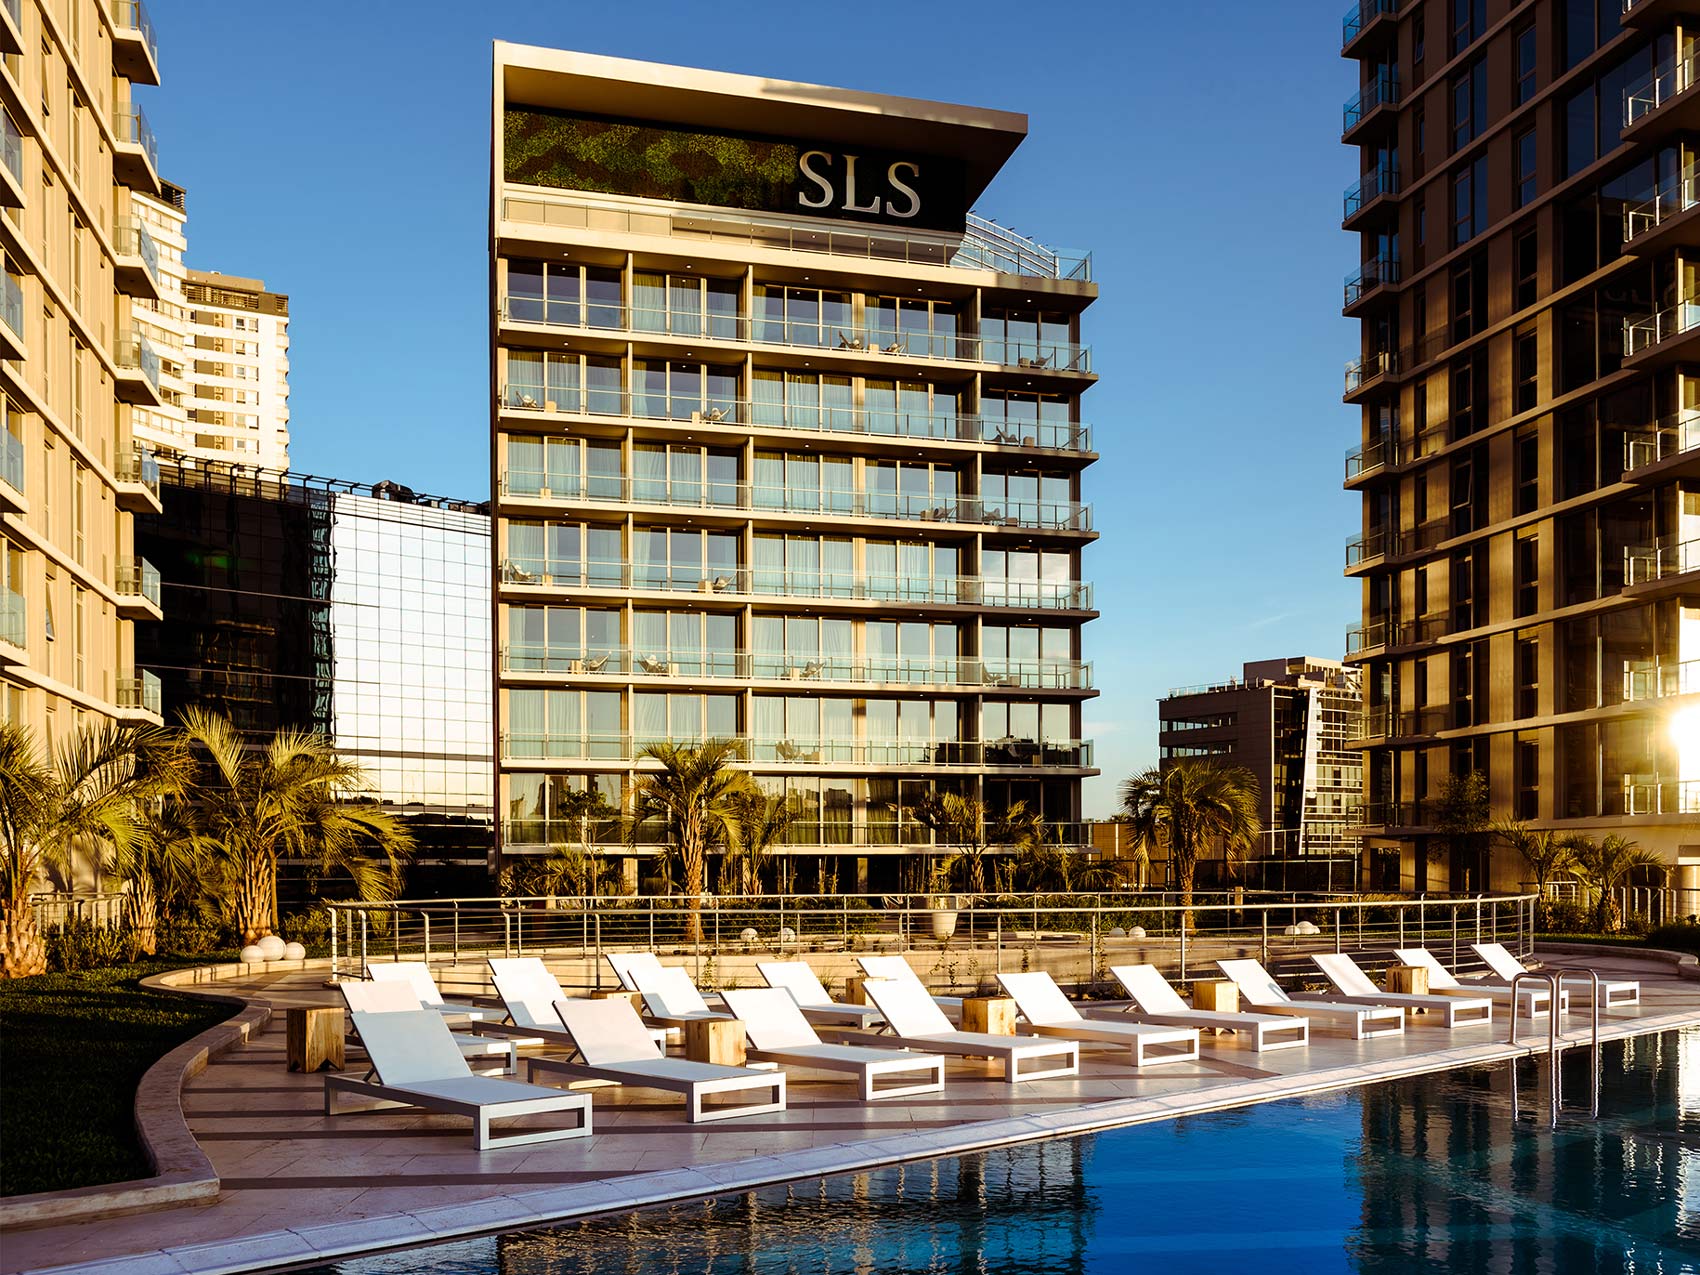 Modern metal and glass exterior of SLS Puerto Madero hotel, overlooking a pool with lounge chairs.